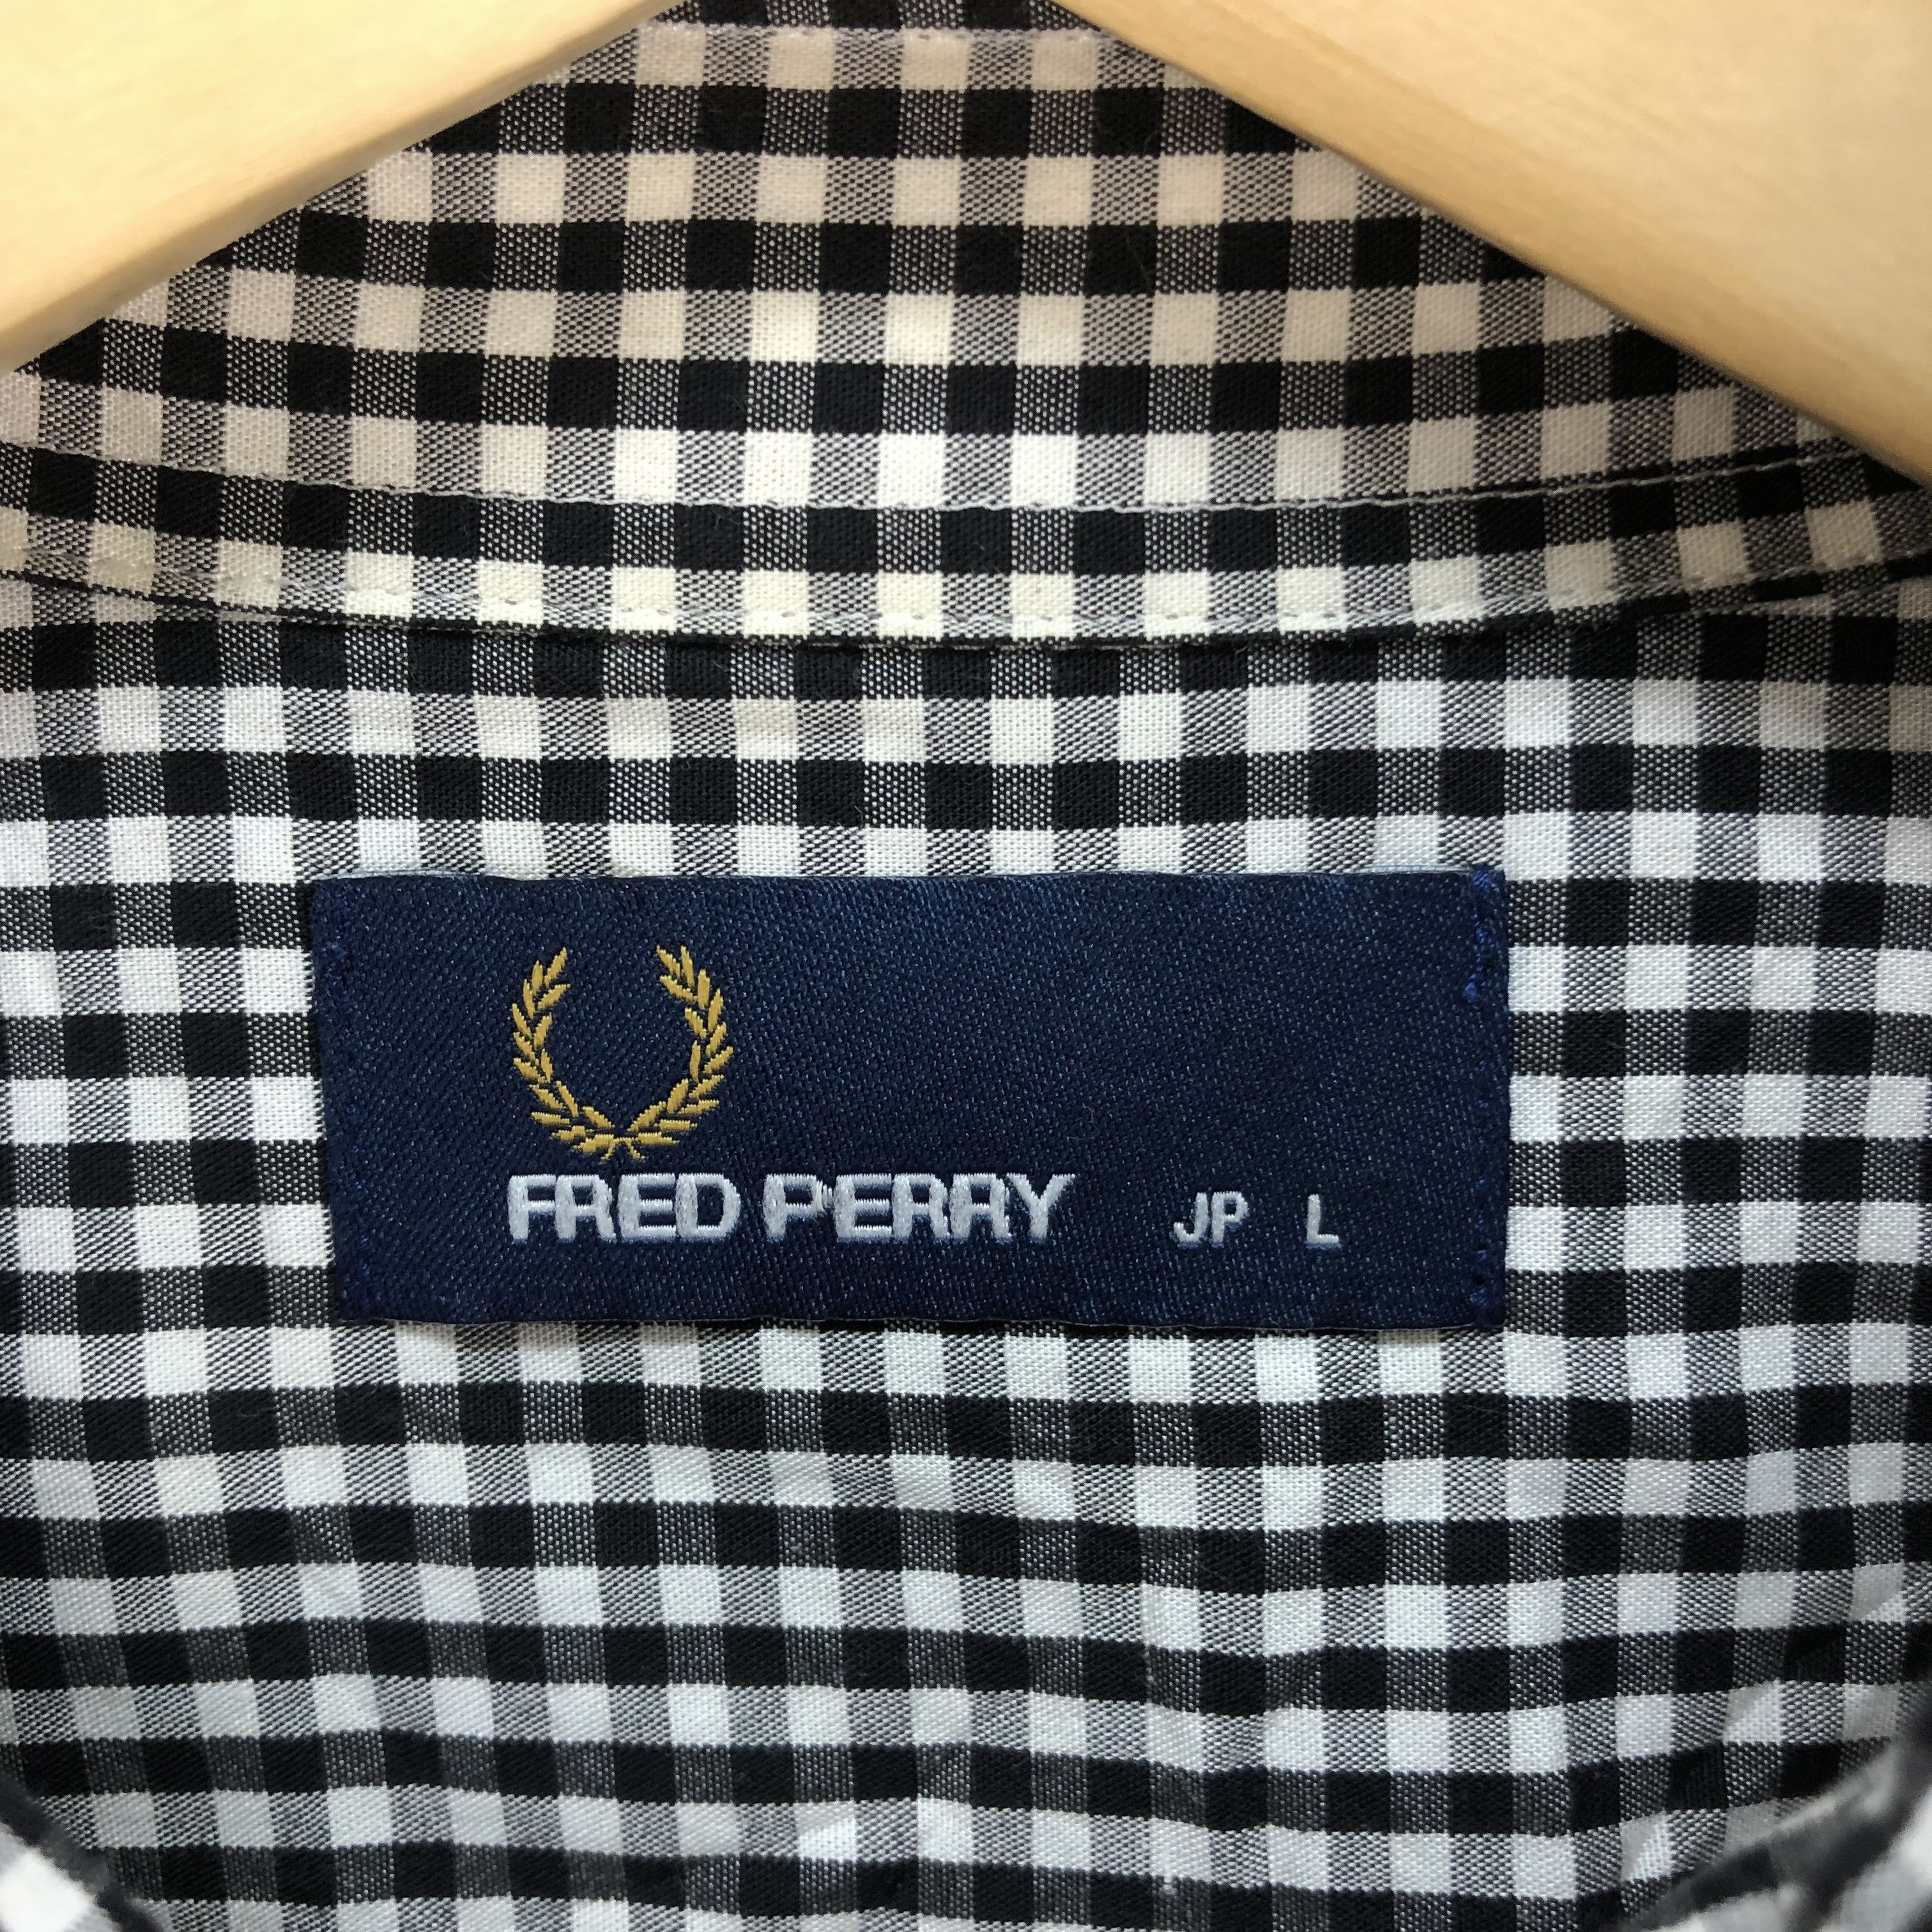 Fred Perry Checked Button Ups Polo Shirts #6023-218 - 6